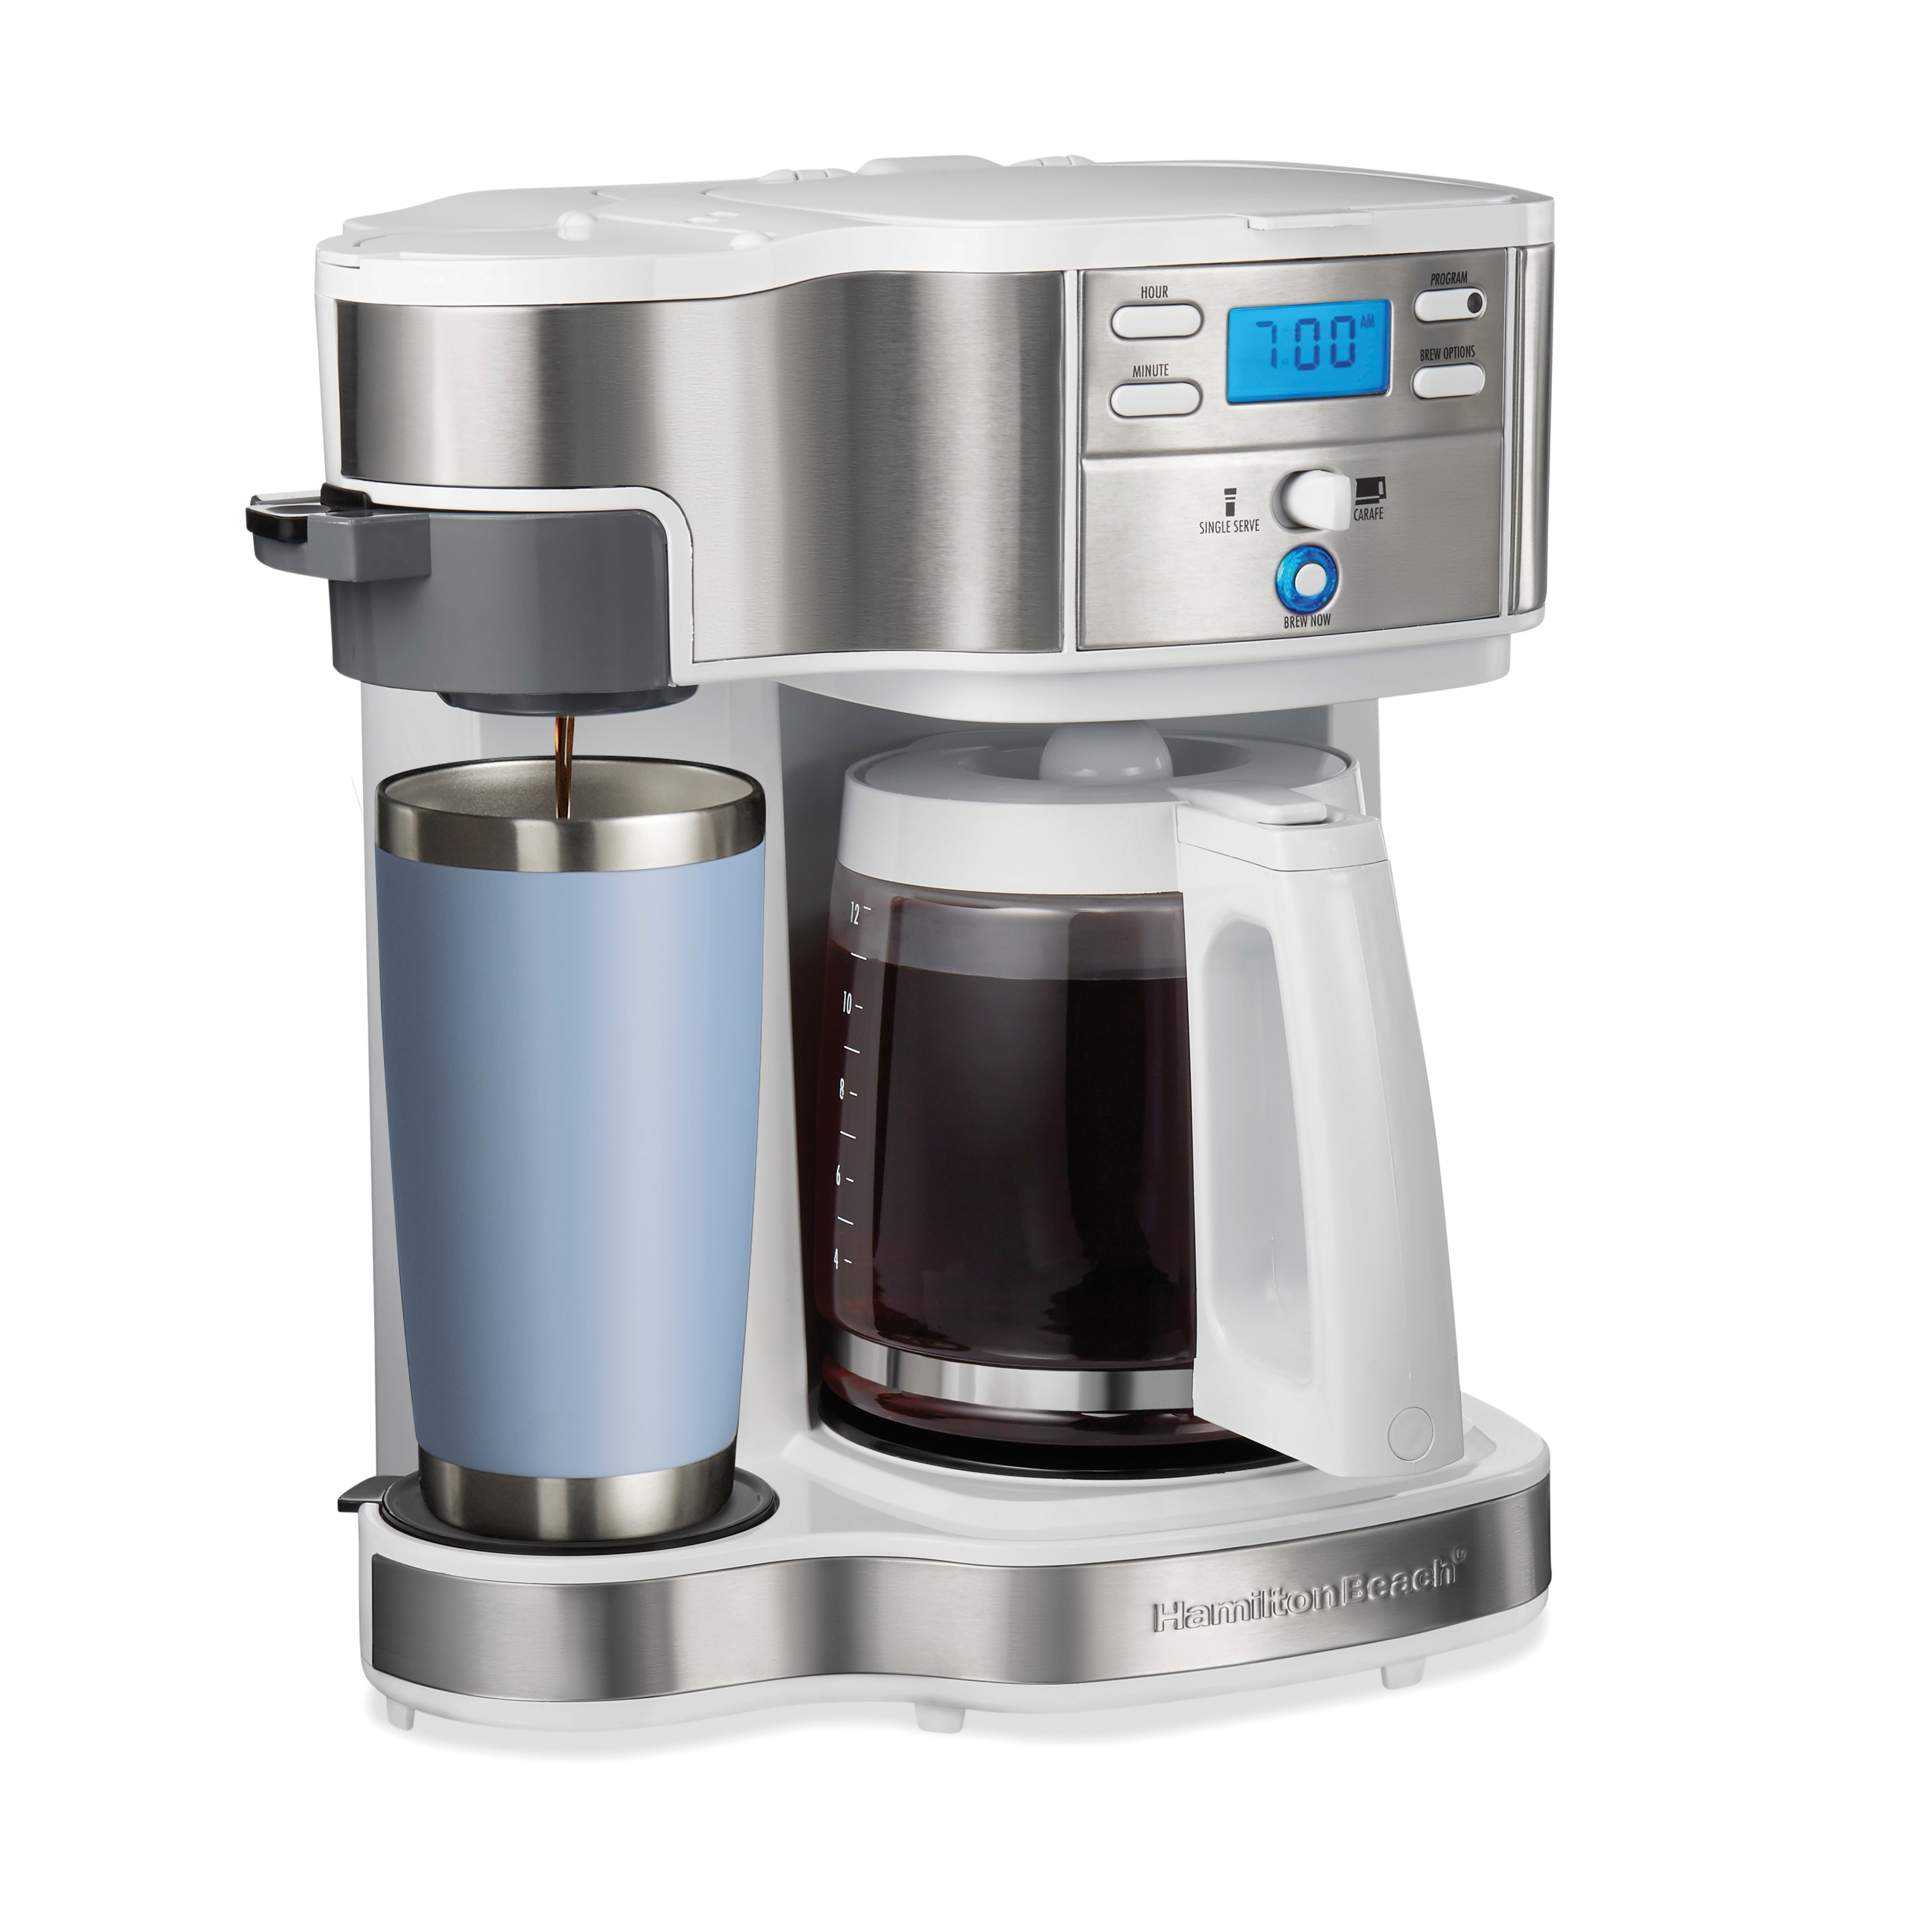 https://ak1.ostkcdn.com/images/products/is/images/direct/b90070c0926e6c26b42d00e18382dc0ca8d9bd1d/Hamilton-Beach-2-Way-Programmable-Coffee-Maker%2C.jpg